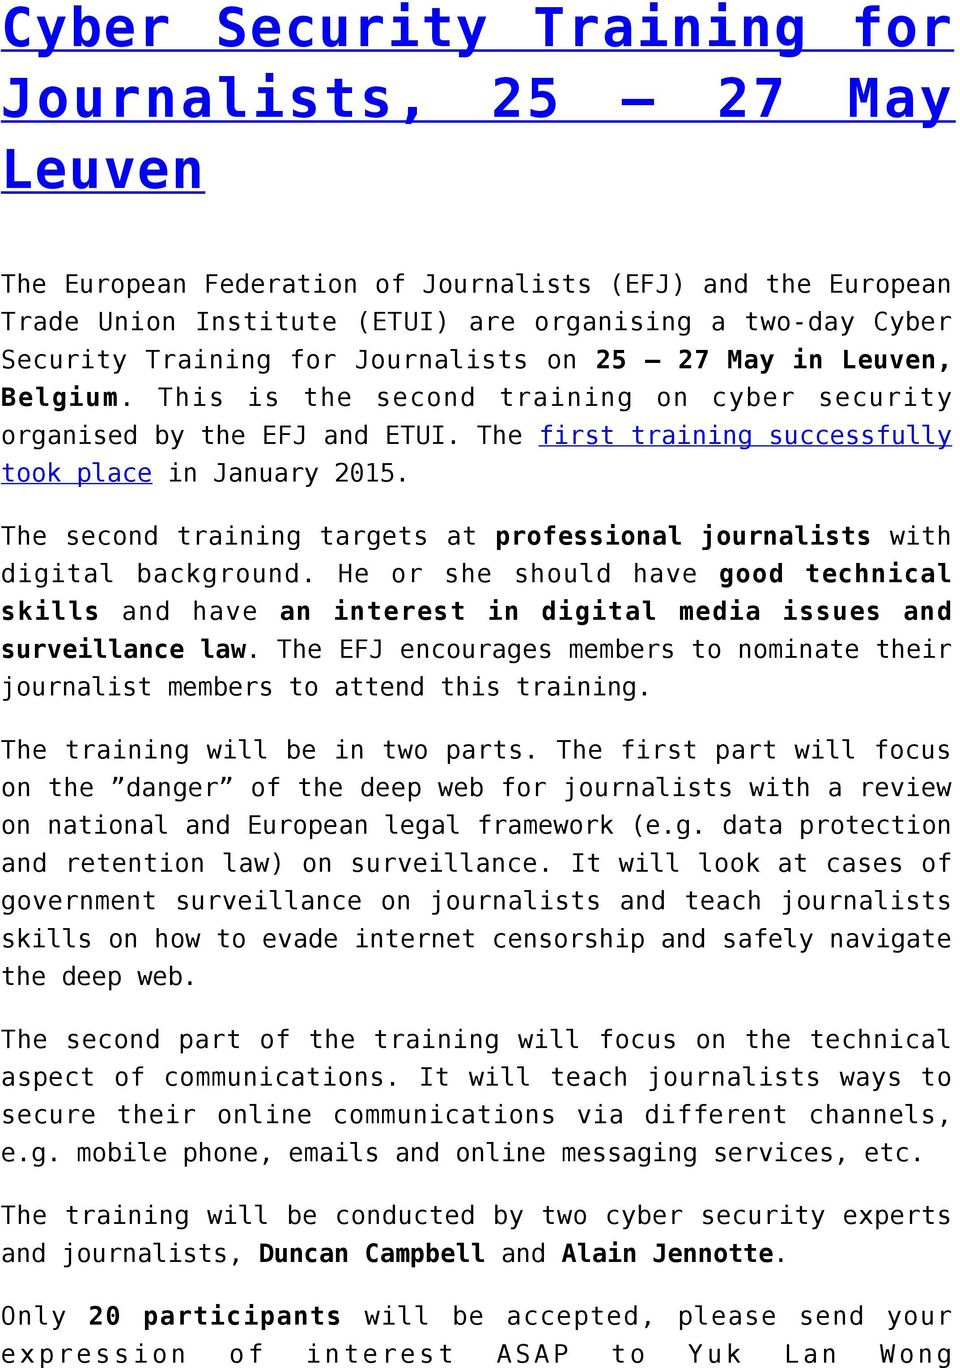 The second training targets at professional journalists with digital background. He or she should have good technical skills and have an interest in digital media issues and surveillance law.